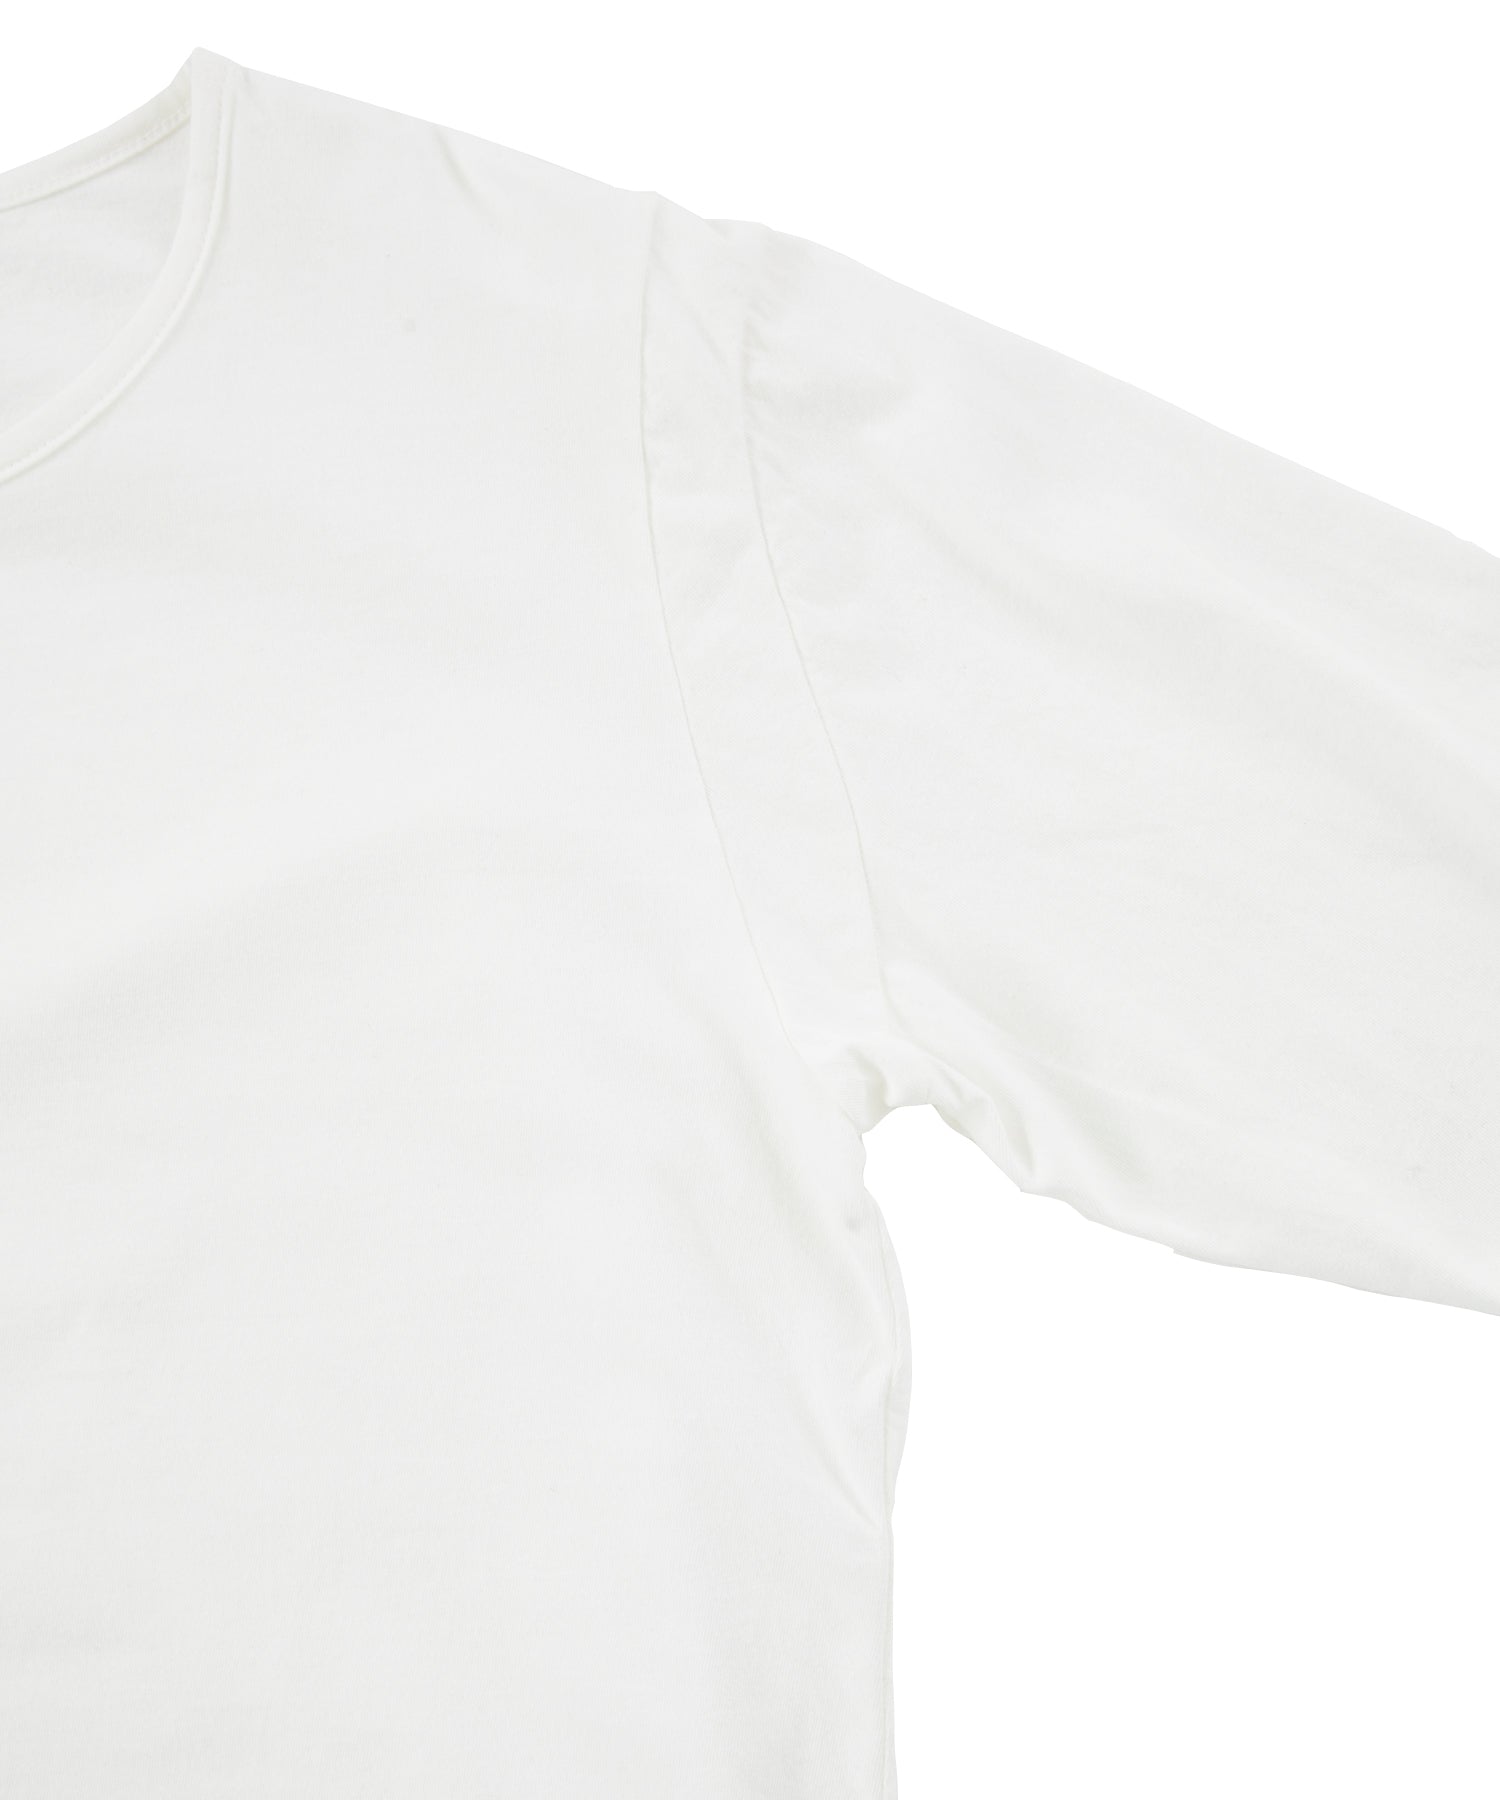 Load image into Gallery viewer, Natural Soft Cotton Plain Stitches Crew Neck T-shirt - WHITE